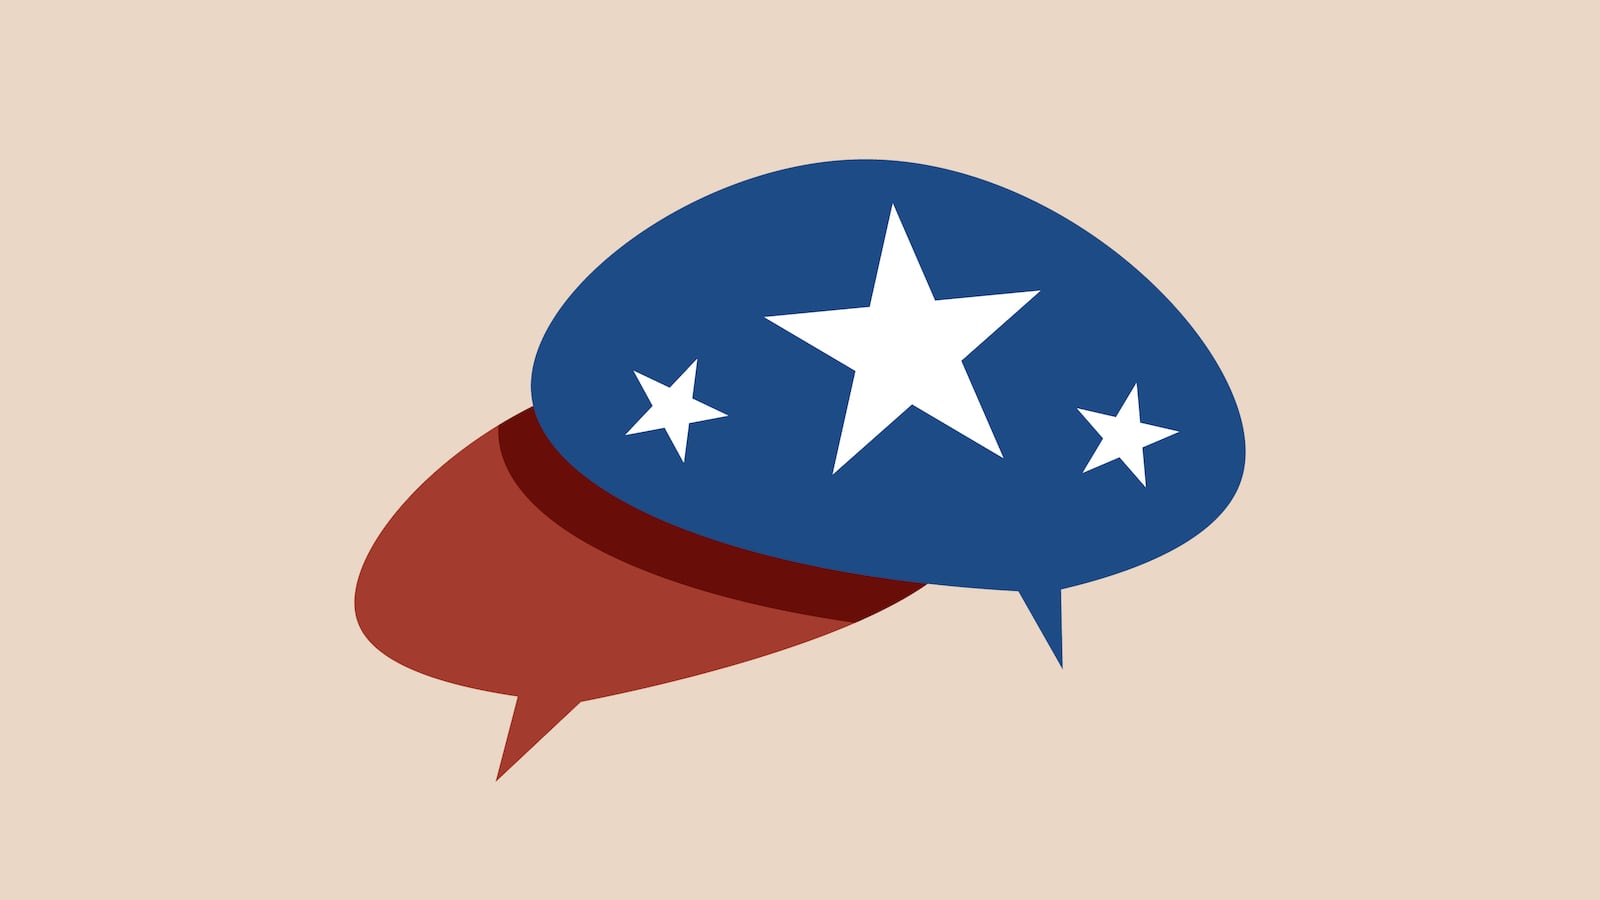 Illustration of two speech bubbles: one red and one blue with three white stars.